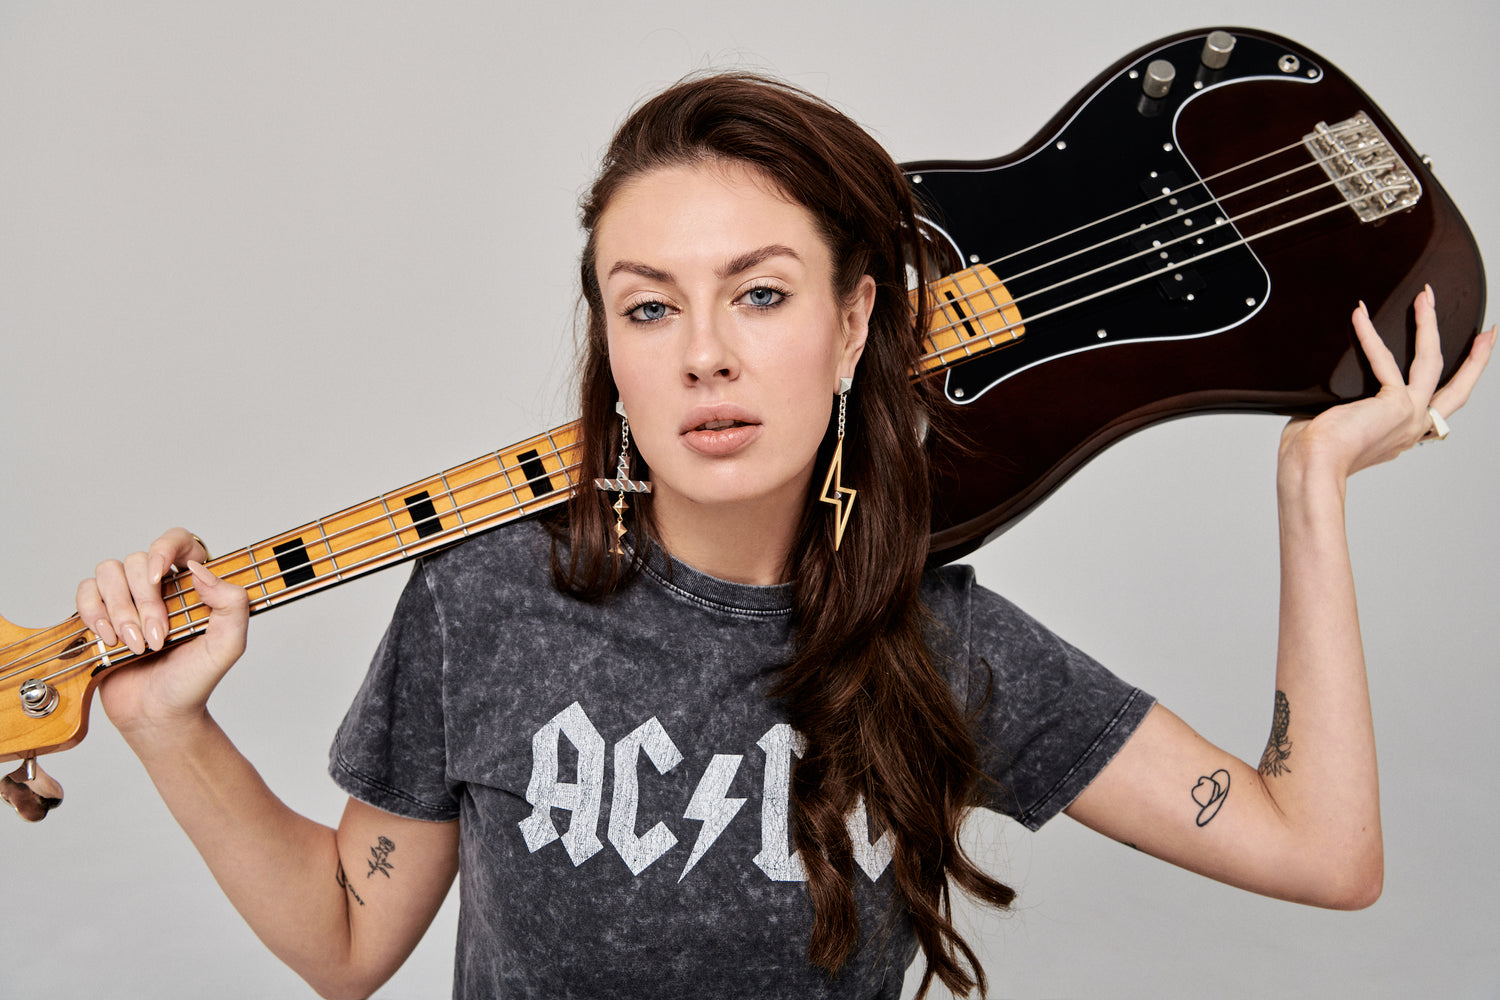 Model stands with bass guitar behind her head. Glamrock look with statement earring featuring mixed metals of sterling silver and 18k gold plating are framed by the bass. Asymmetrical styling with ACDC band tee and statement earrings Fame and New Romance.